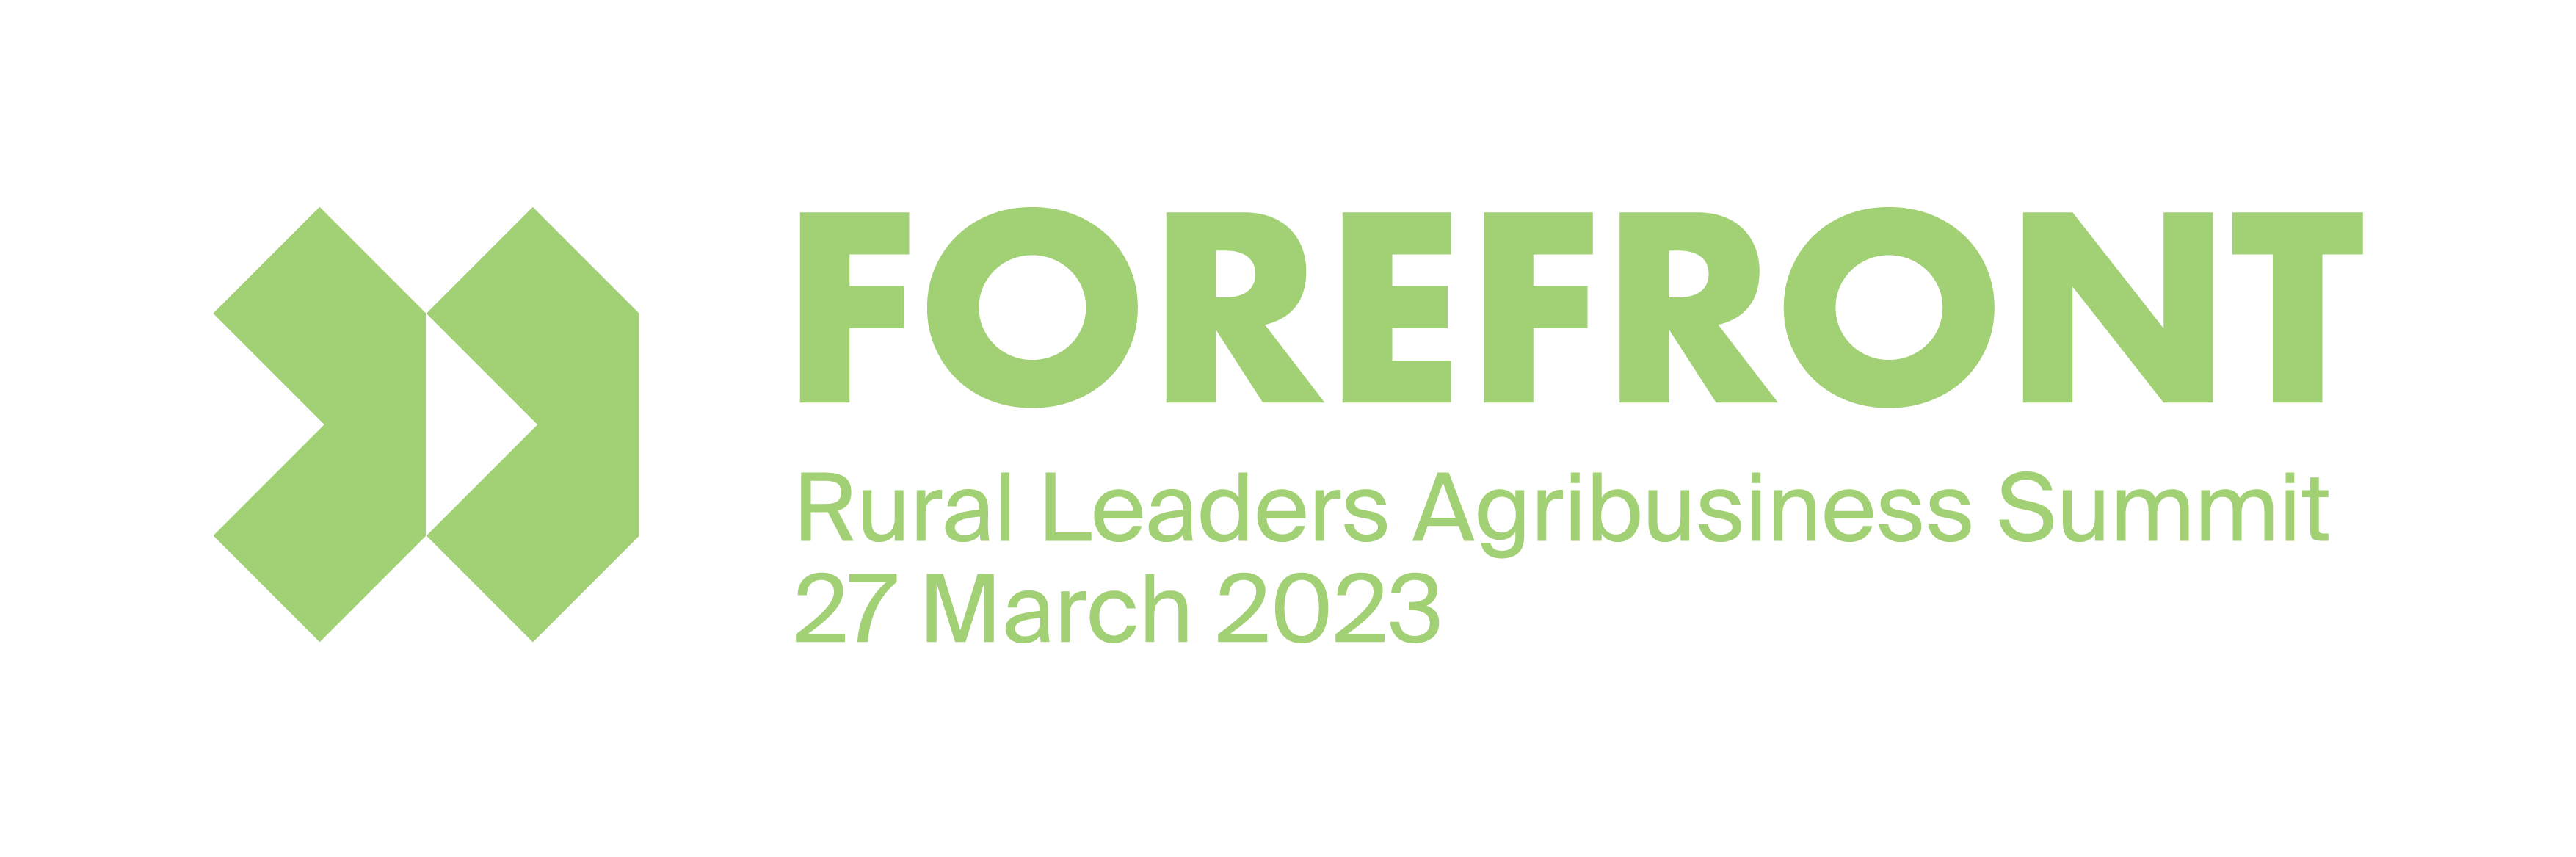 Forefront - Rural Leaders Agribusiness Summit